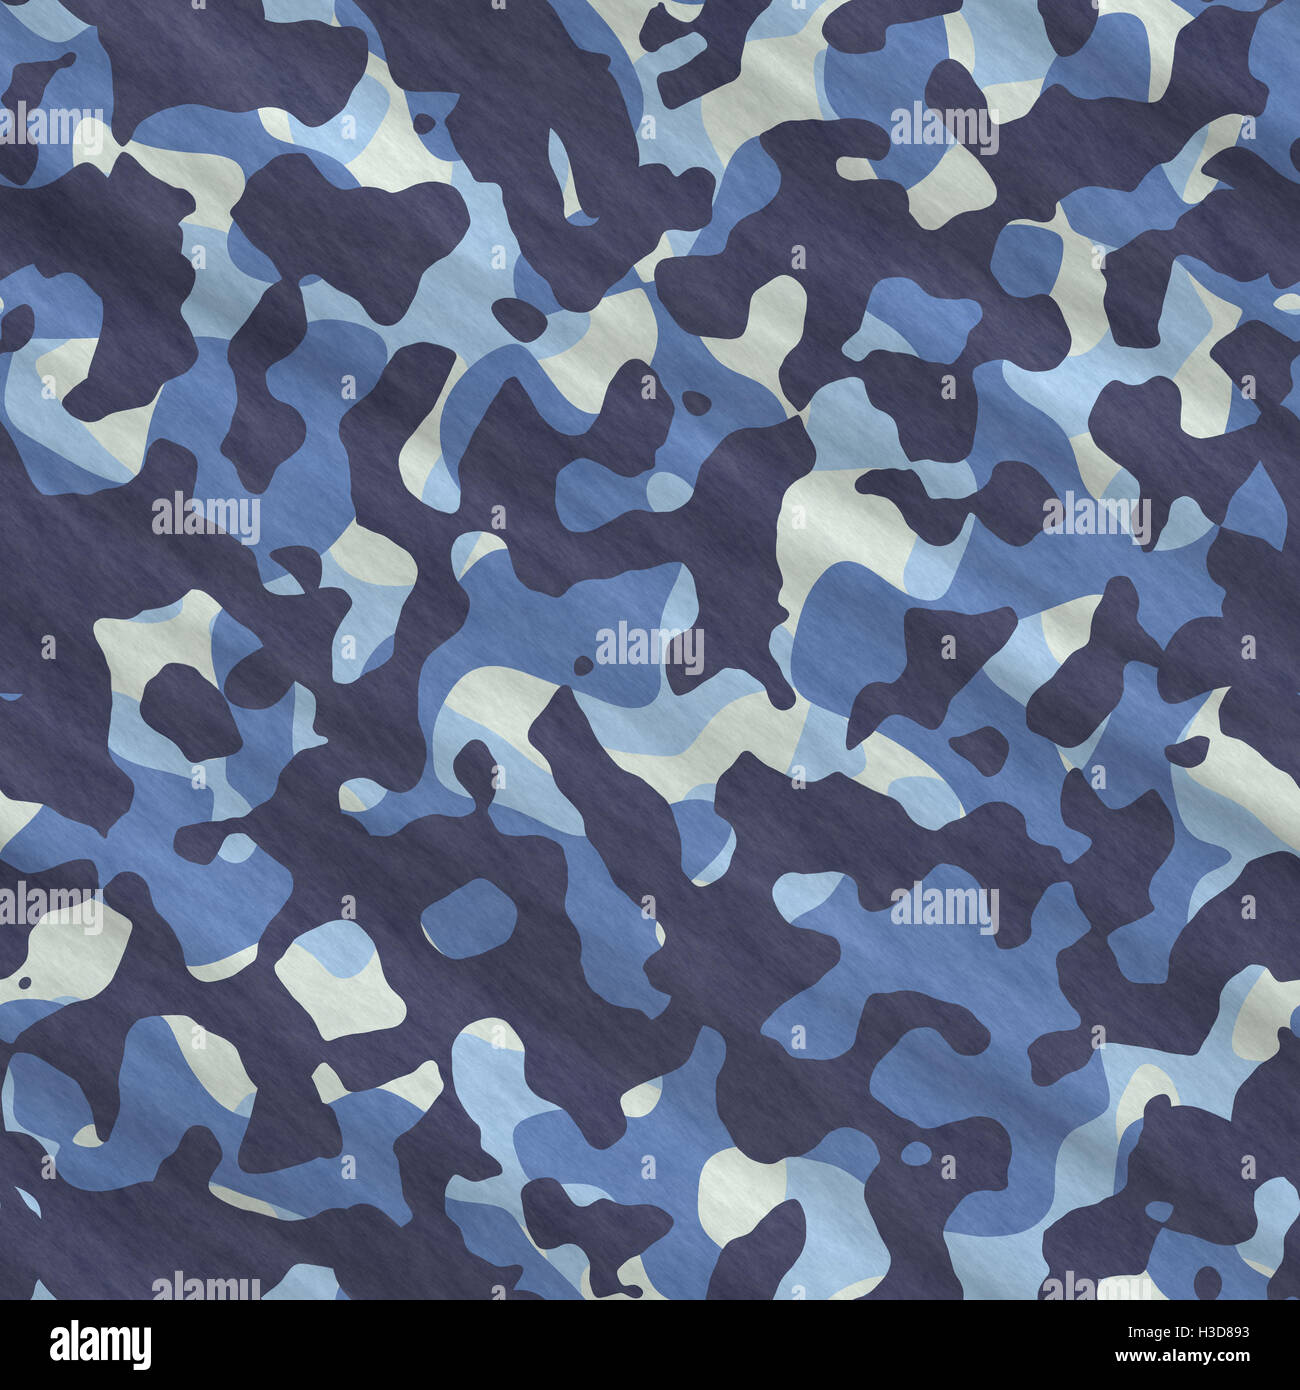 Abstract camo pattern - digitally generated image Stock Photo